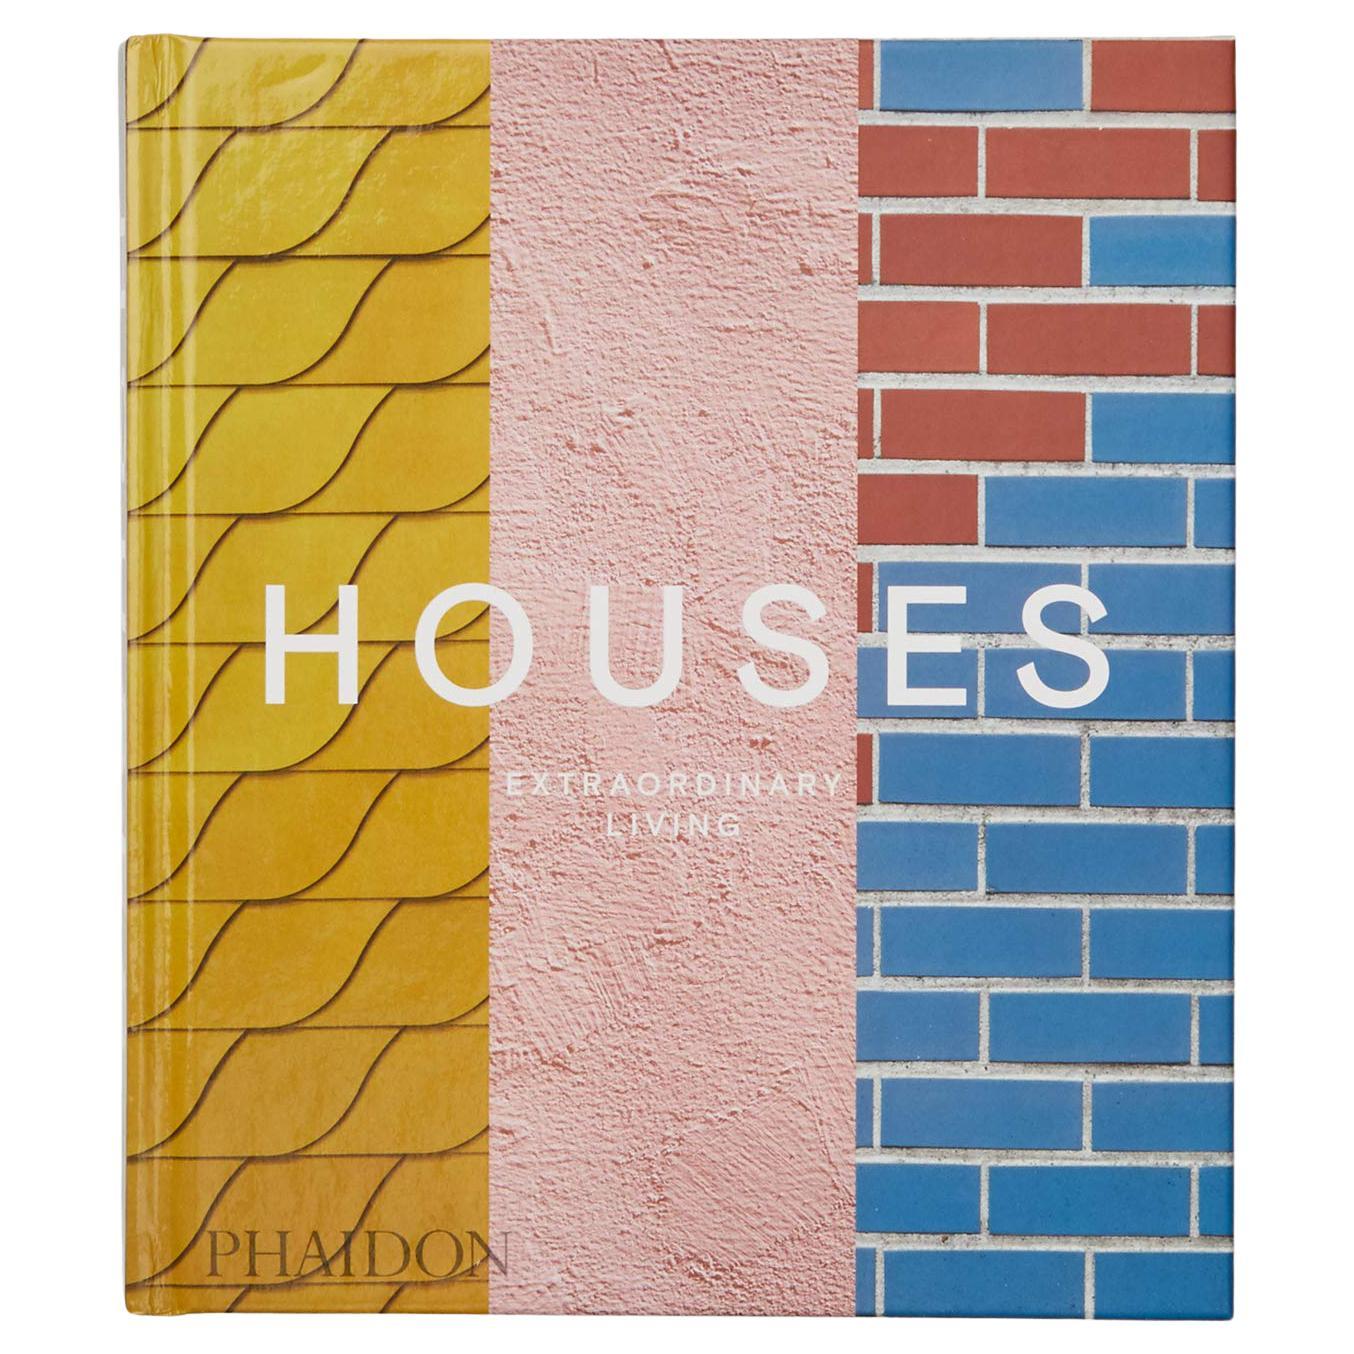 in Stock in Los Angeles, Houses Extraordinary Living Phaidon Editors